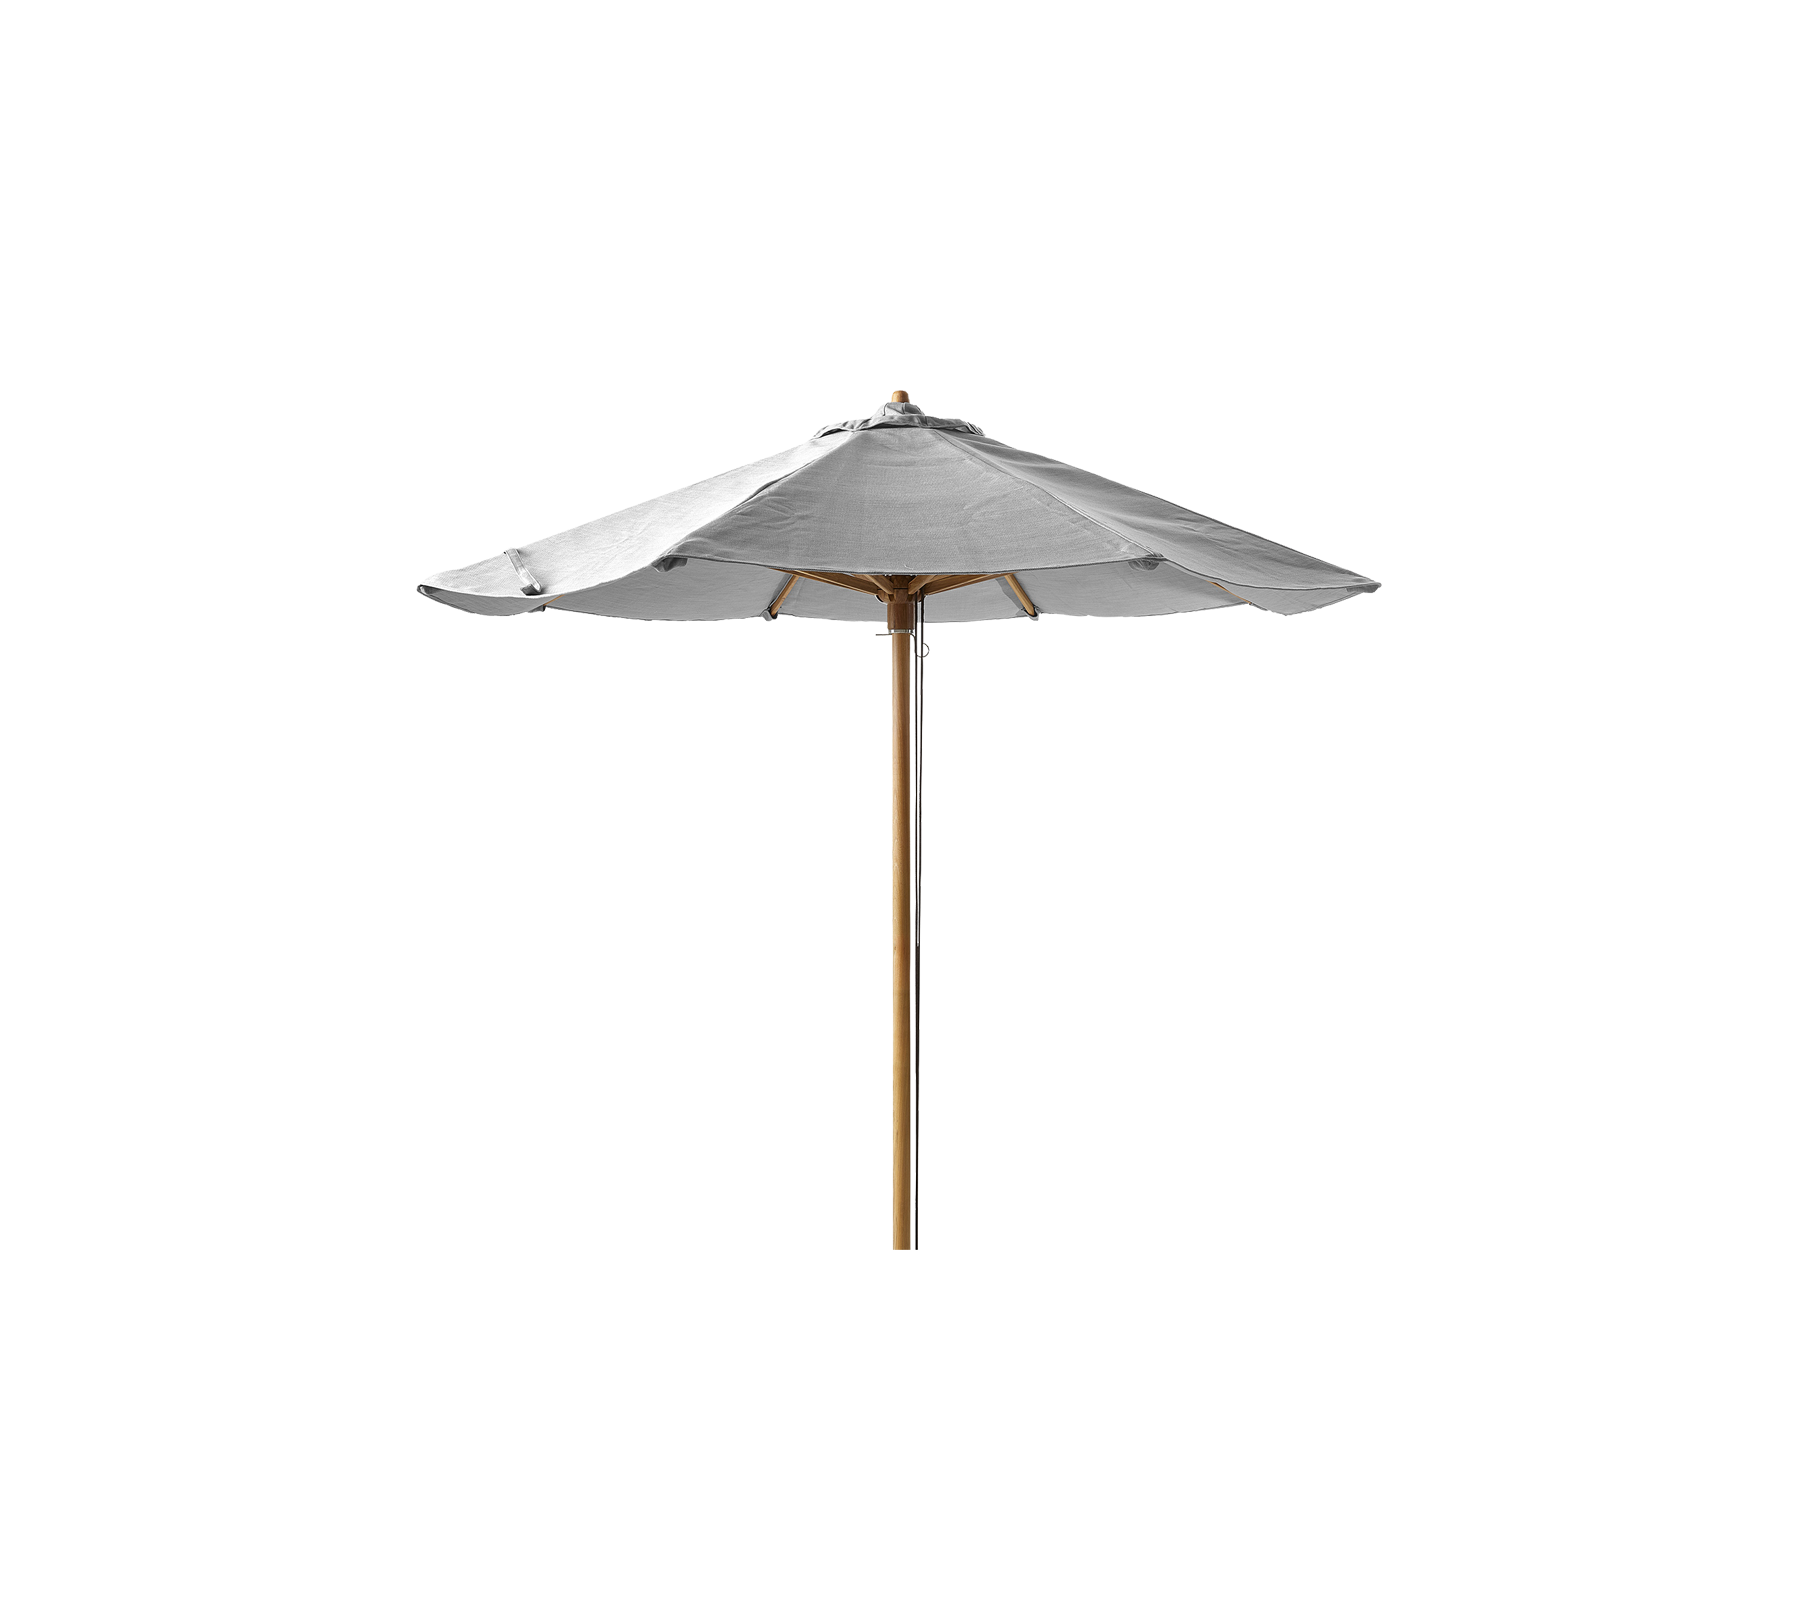 Cane-line - Classic parasol w/pulley system, dia. 2,4 m - 59240TY506